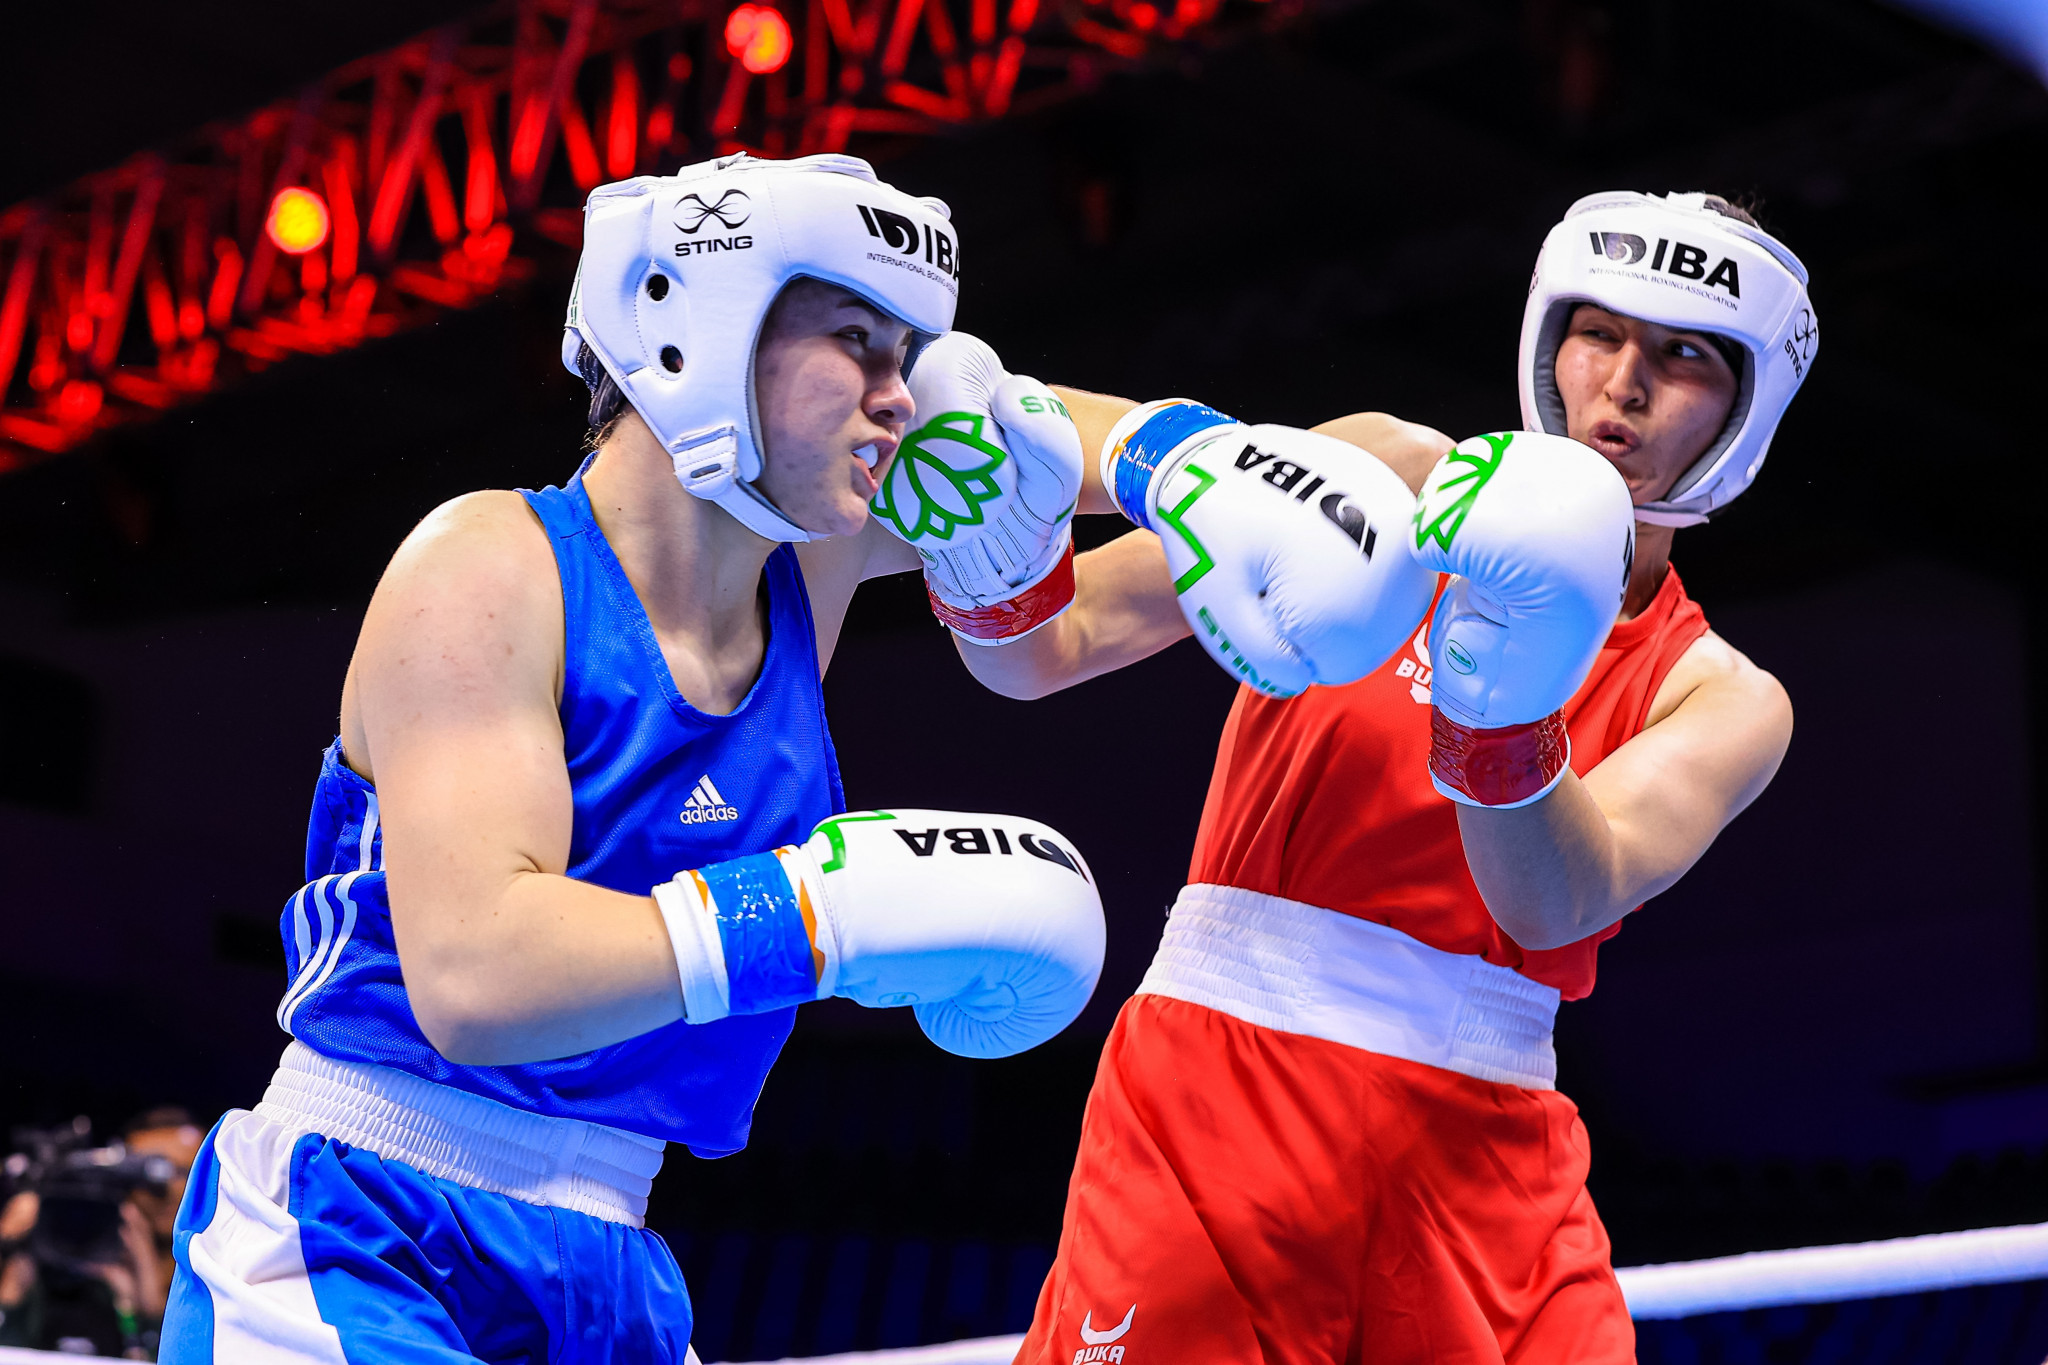 Megan de Cler, who is competing as a neutral athlete after the Dutch Boxing Federation withdrew from the event, overcame Kazakhstan's Nilufar Boboyarova ©IBA